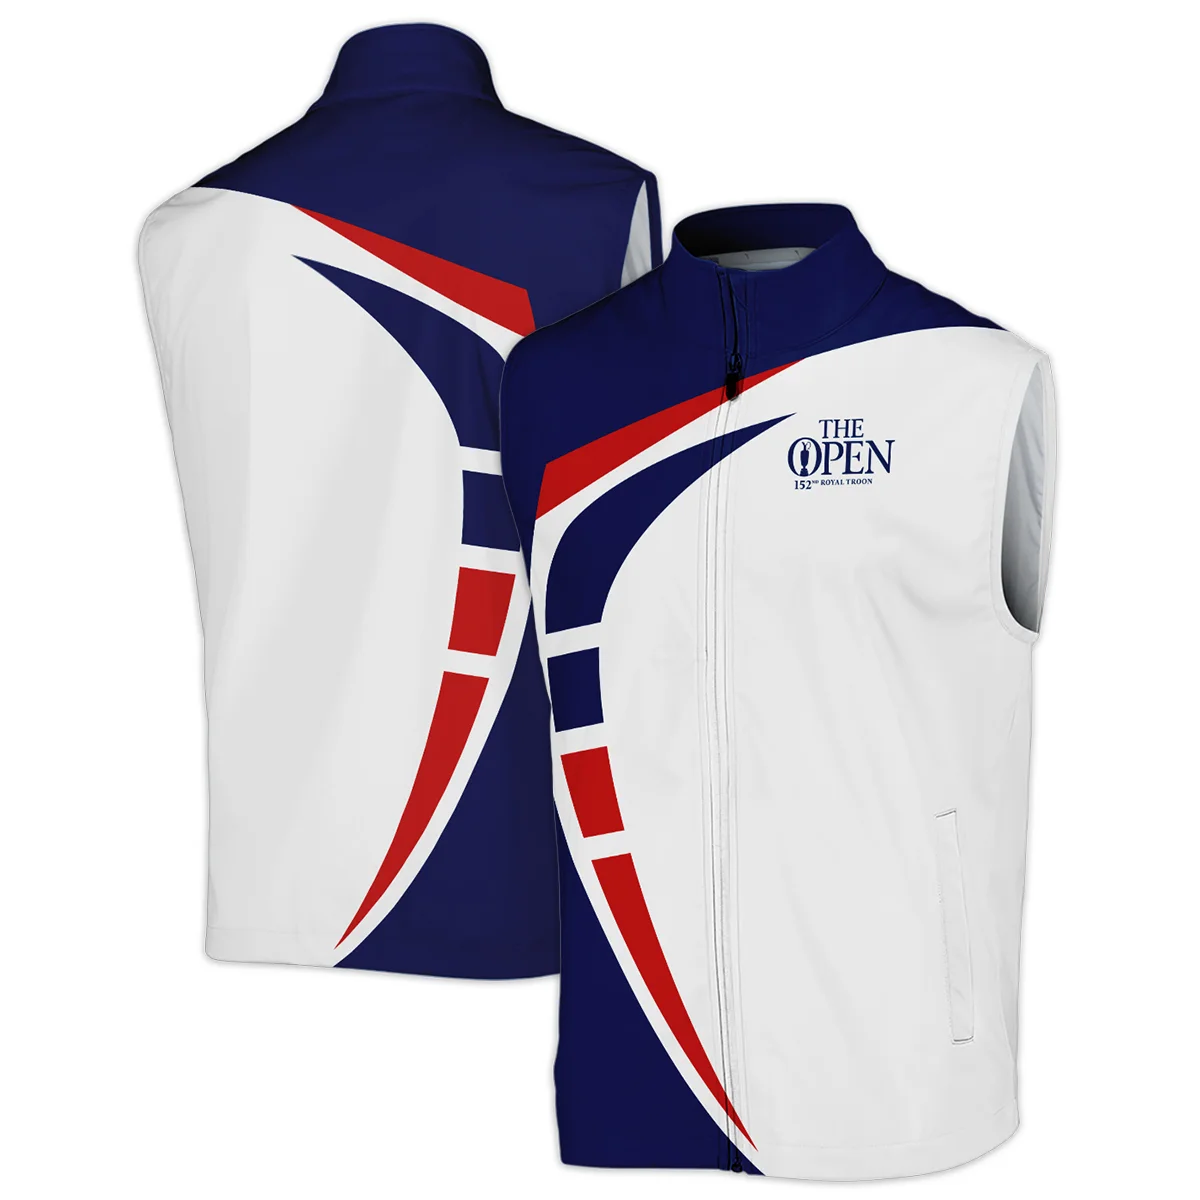 152nd Open Championship Rolex White Blue Red Pattern Background Hoodie Shirt All Over Prints HOTOP270624A03ROXHD